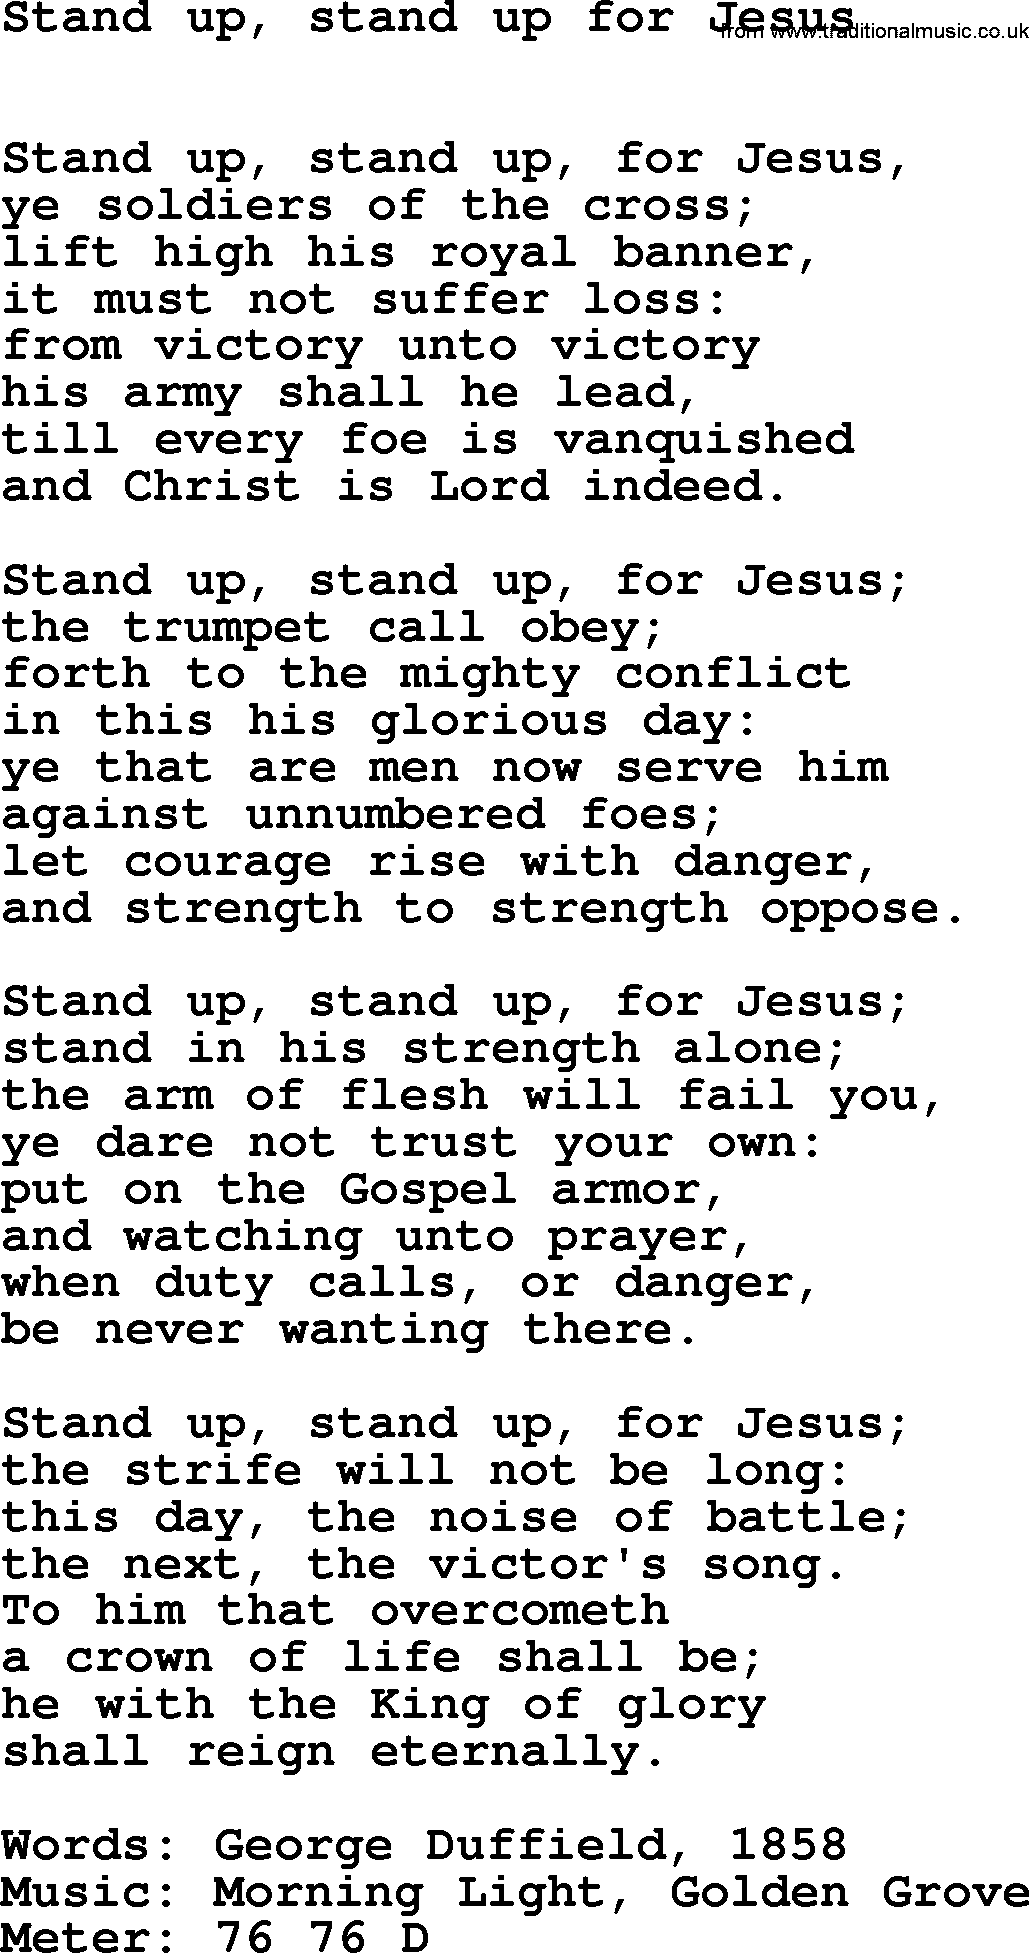 Book of Common Praise Hymn: Stand Up, Stand Up For Jesus.txt lyrics with midi music